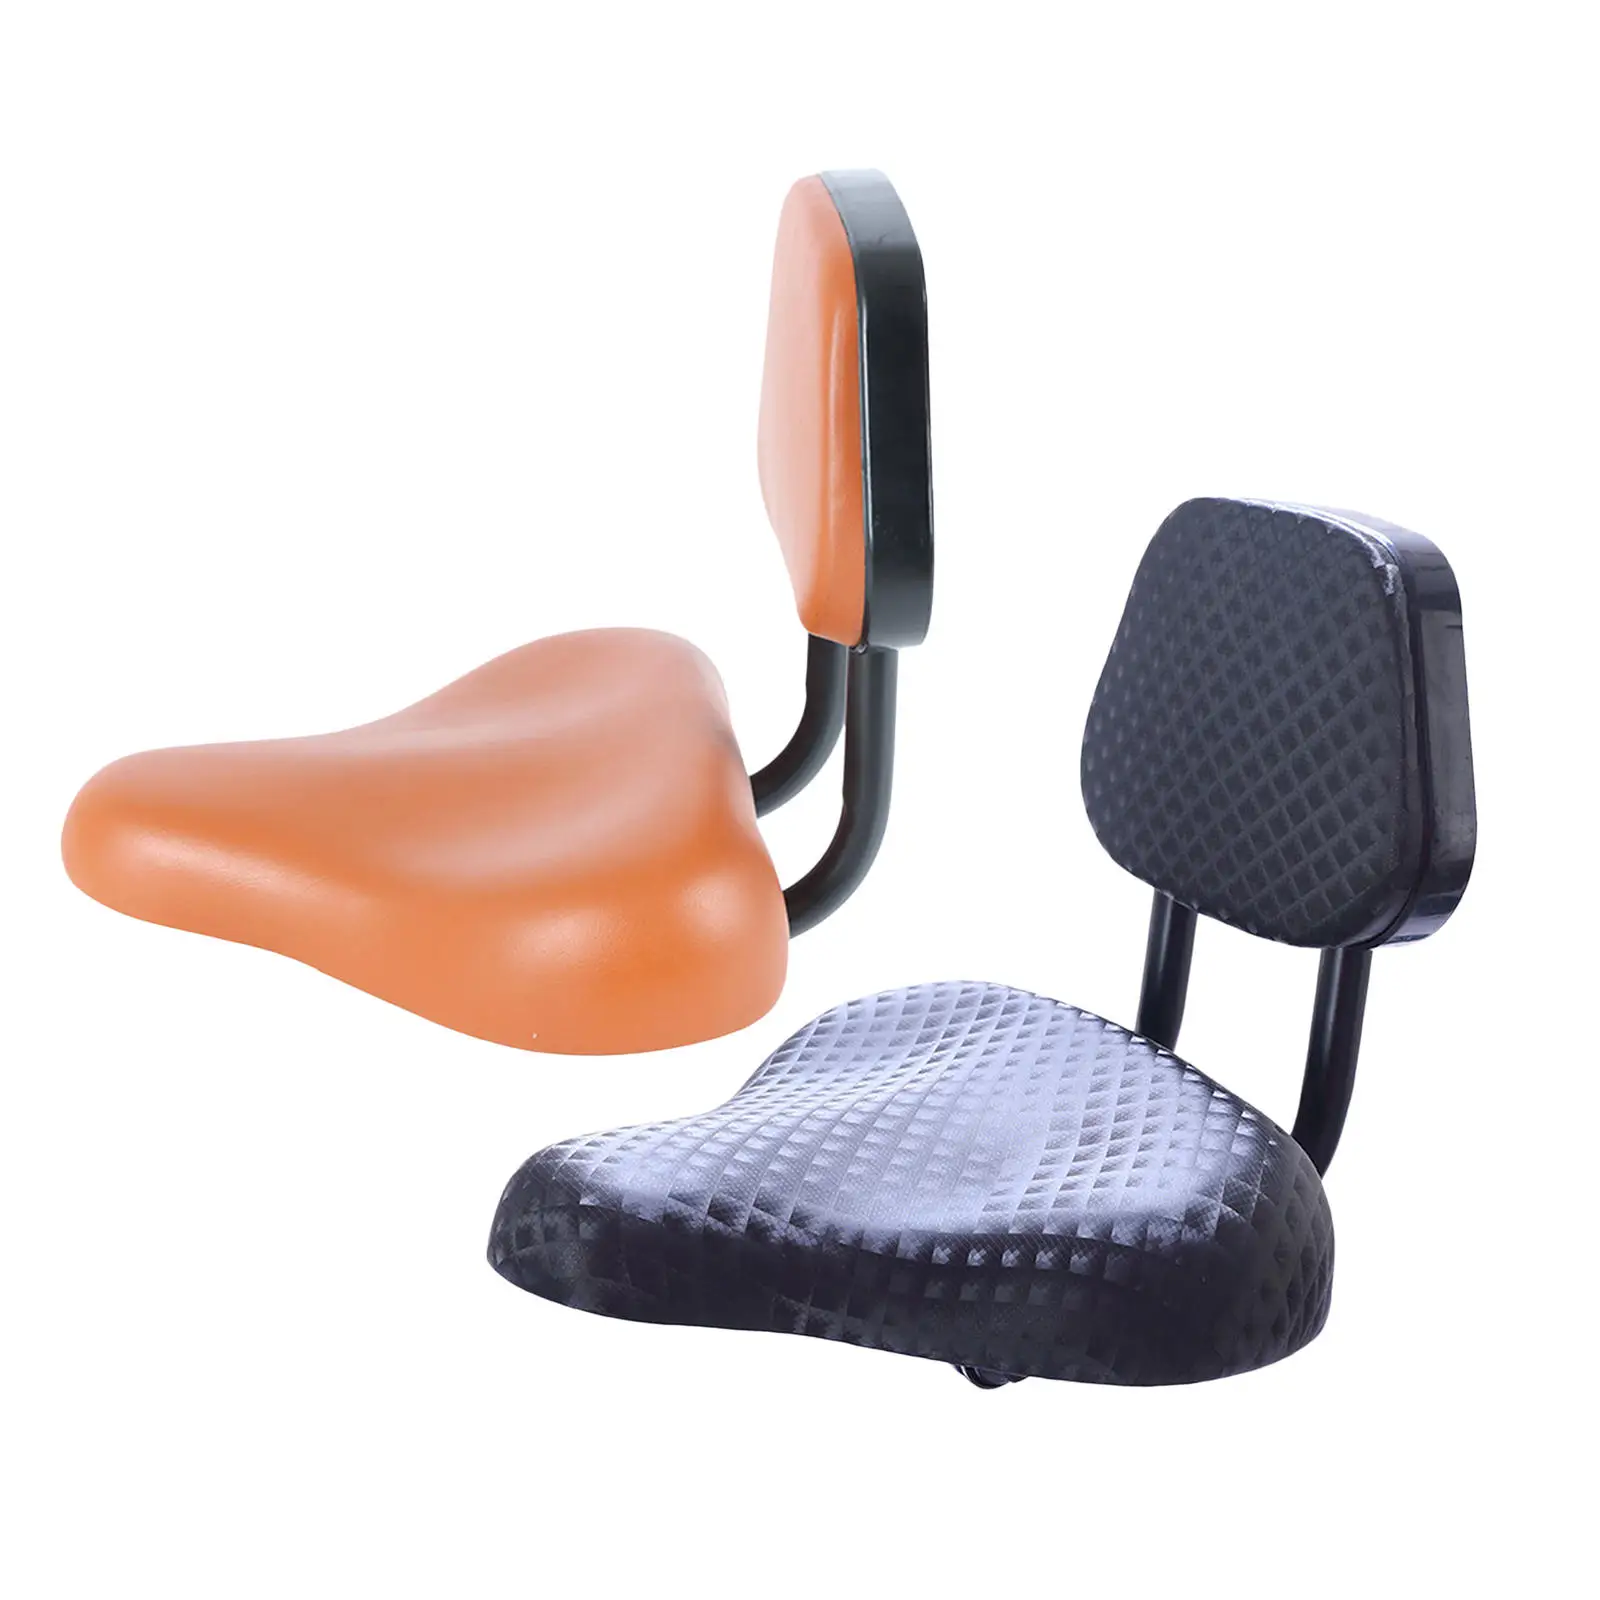 Electric Bike Saddle Seat with Backrest Support Bicycle Rest Rear Cushion Accessories Replacement Parts for Outdoor Cycling